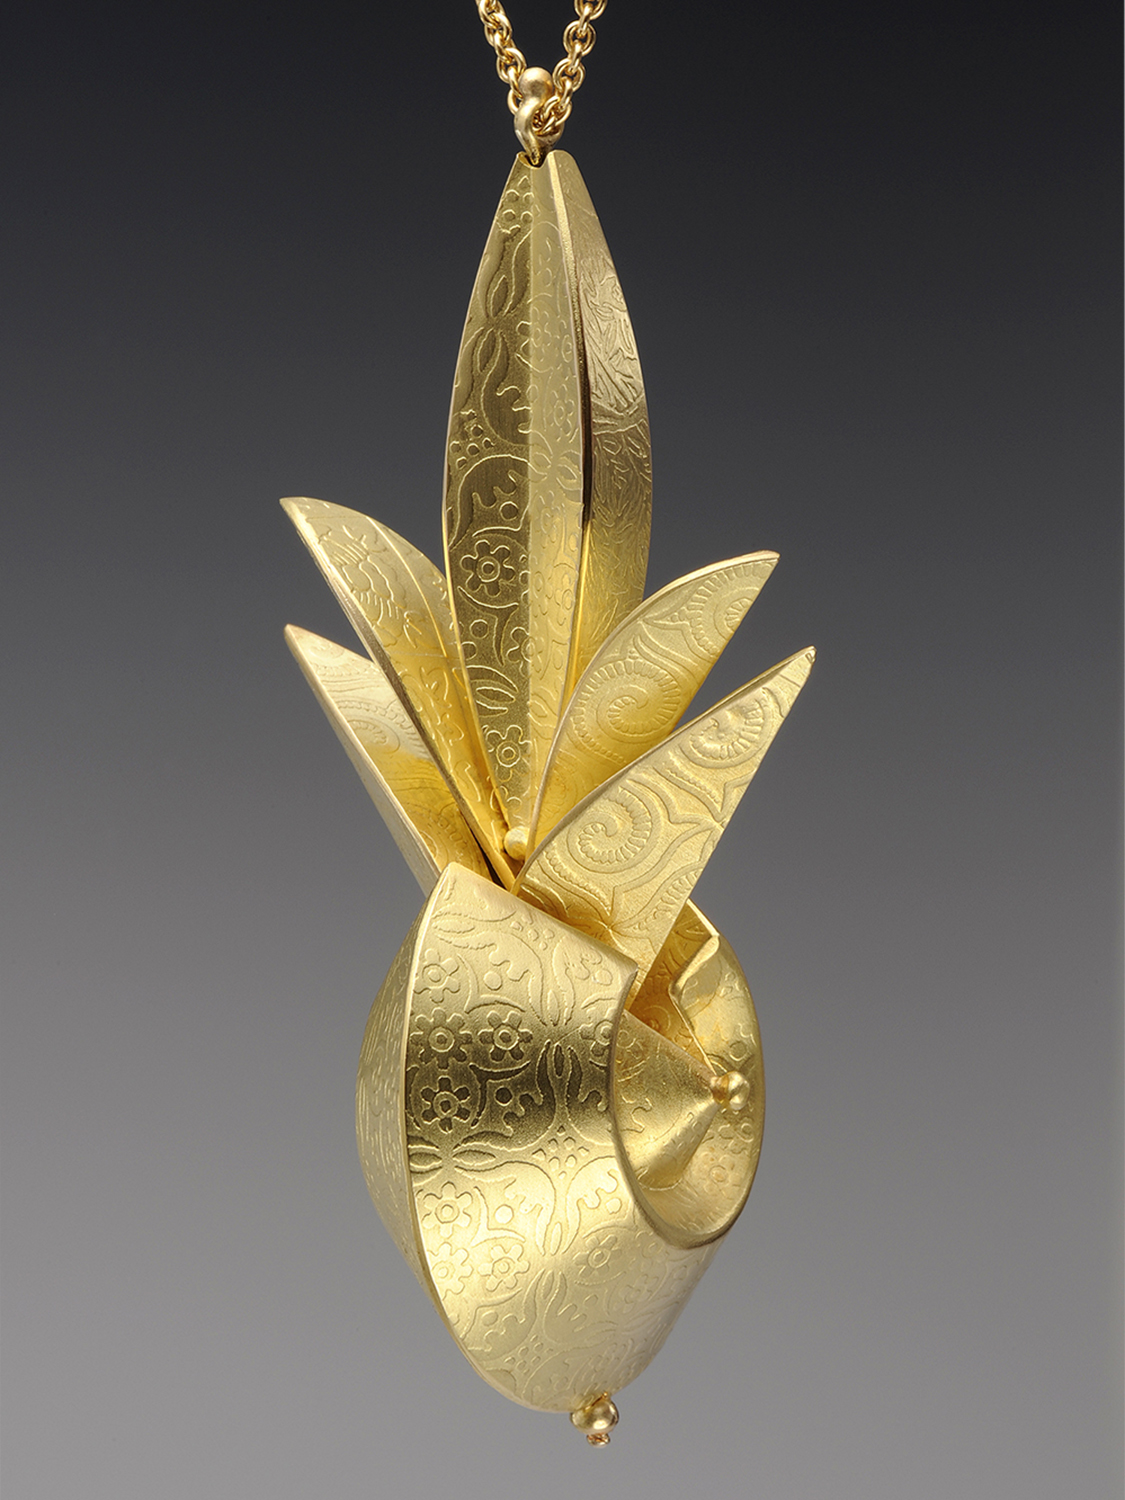 Gold Pendant  |  1999  |  18k gold  |  3.25 x 1.5 x 1.5 inches